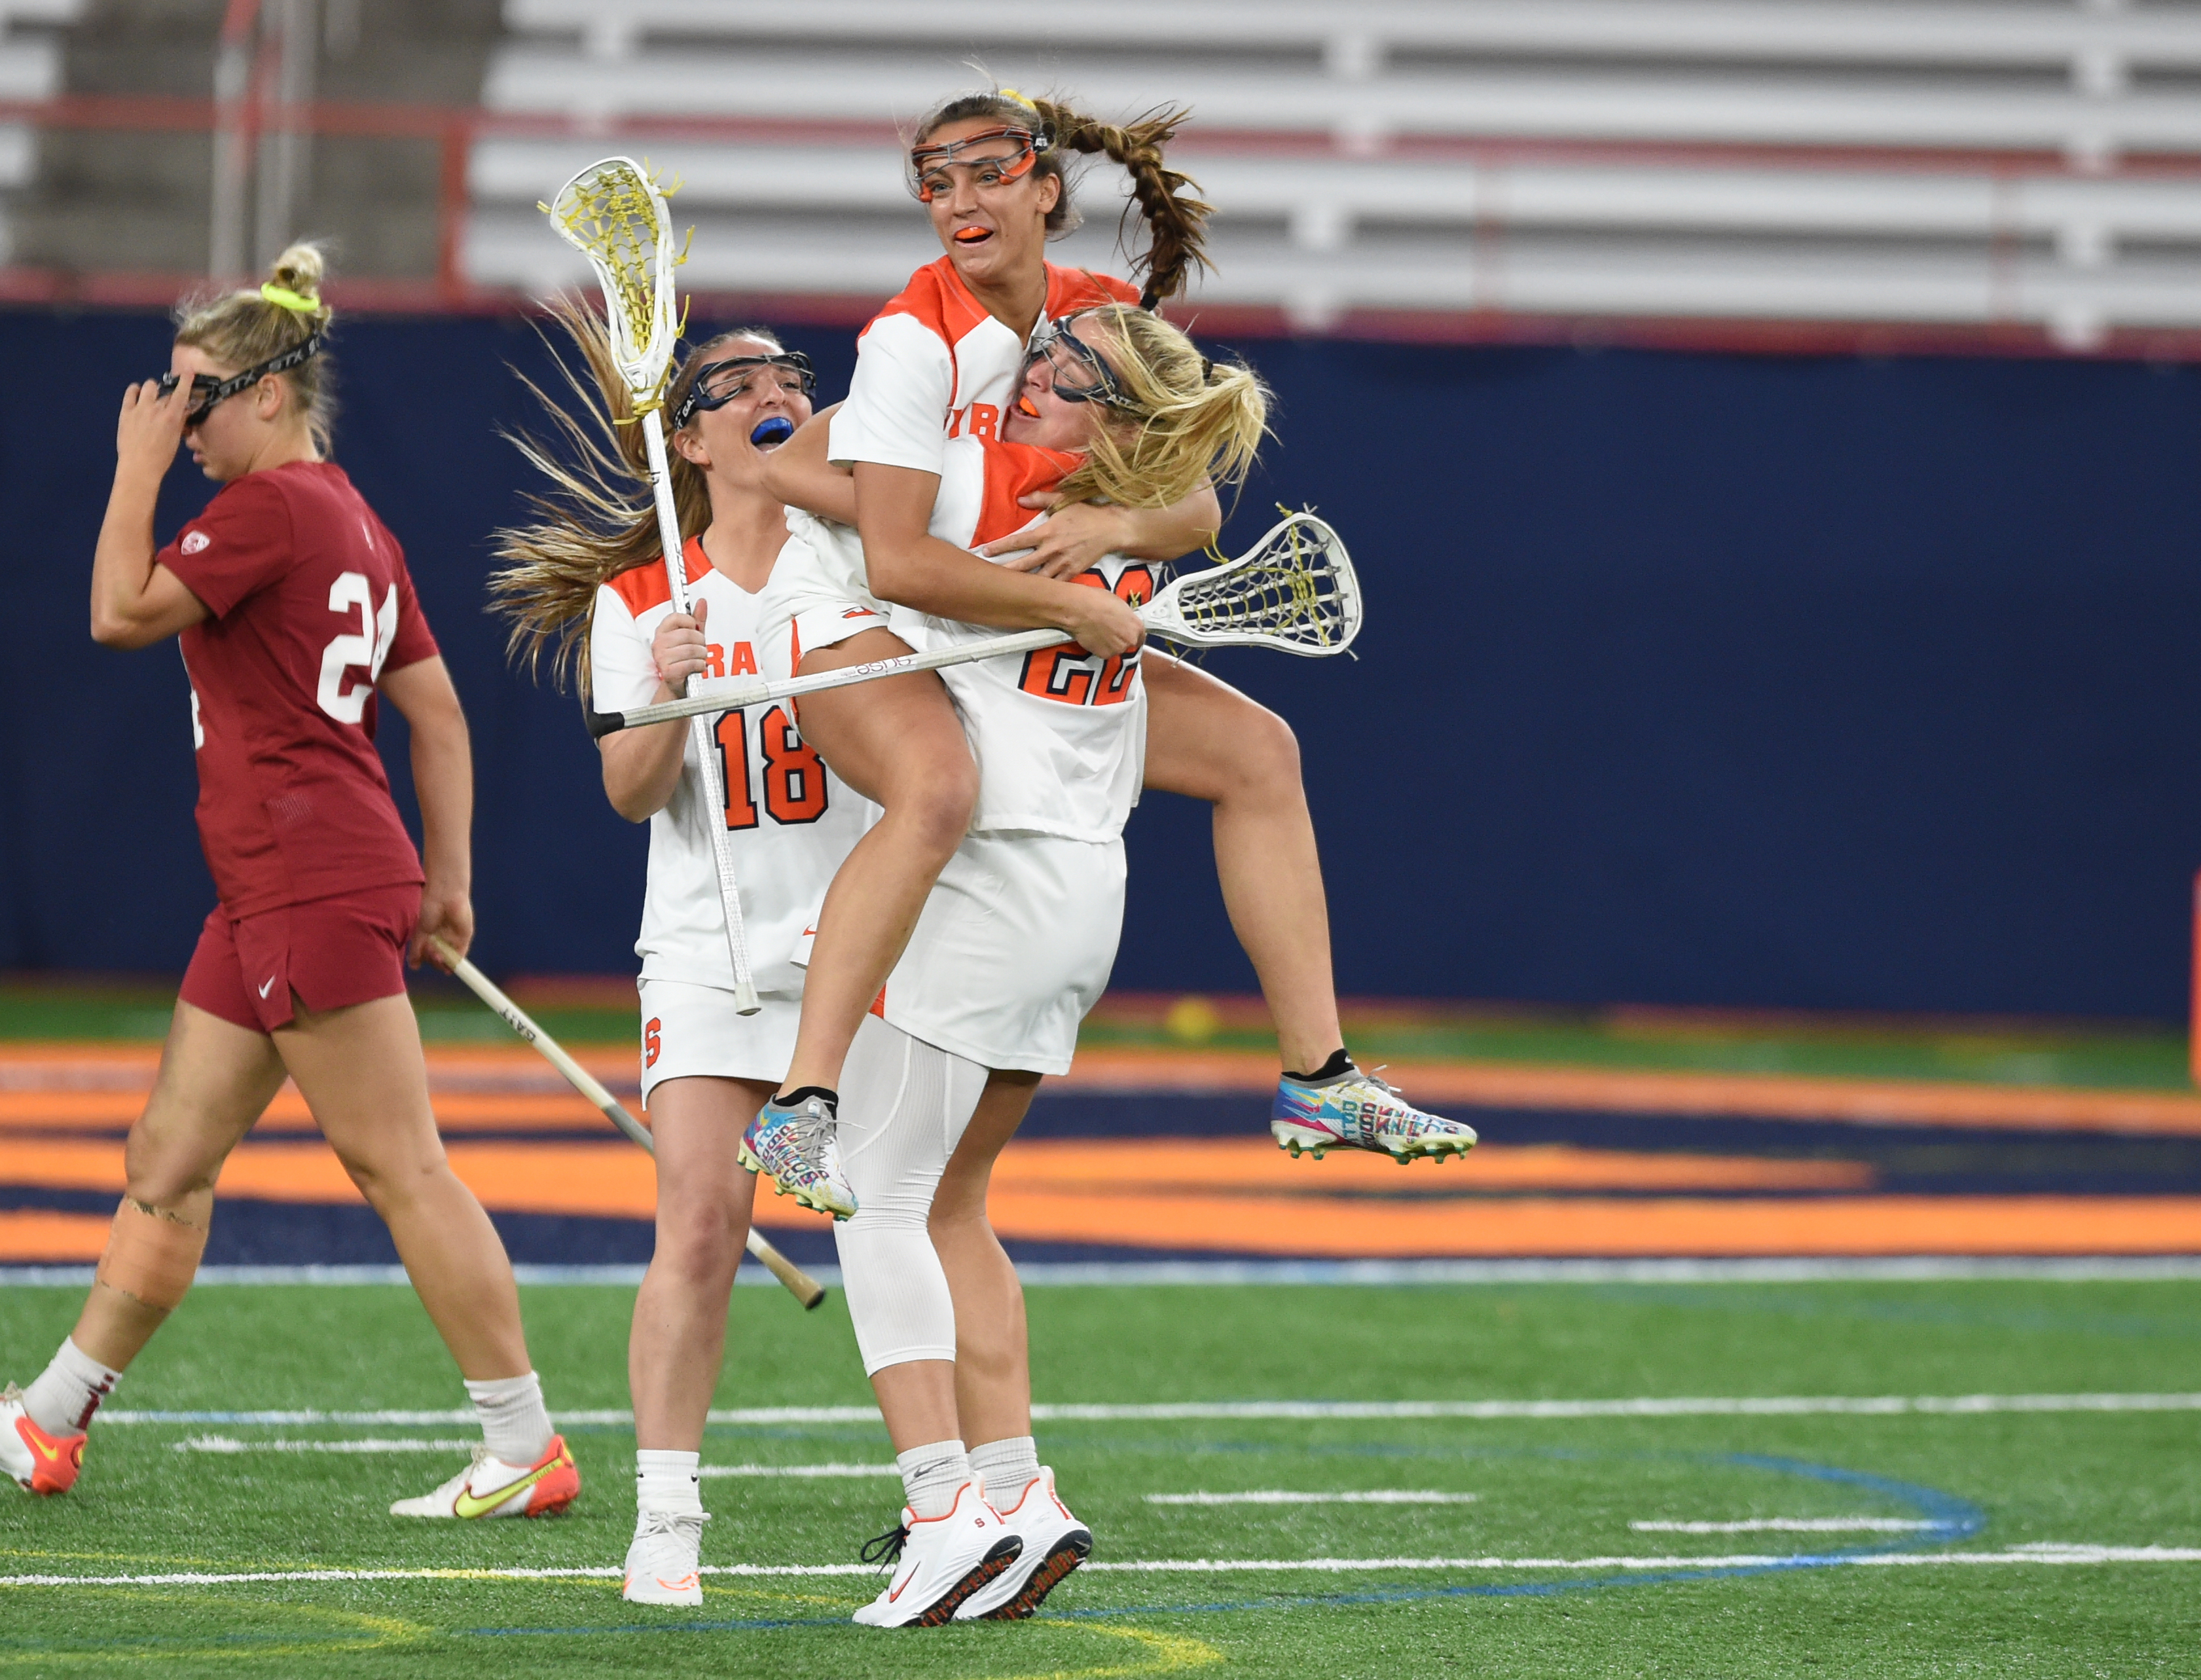 Syracuse women's lacrosse opens season with 12-9 win over No. 13 Stanford 